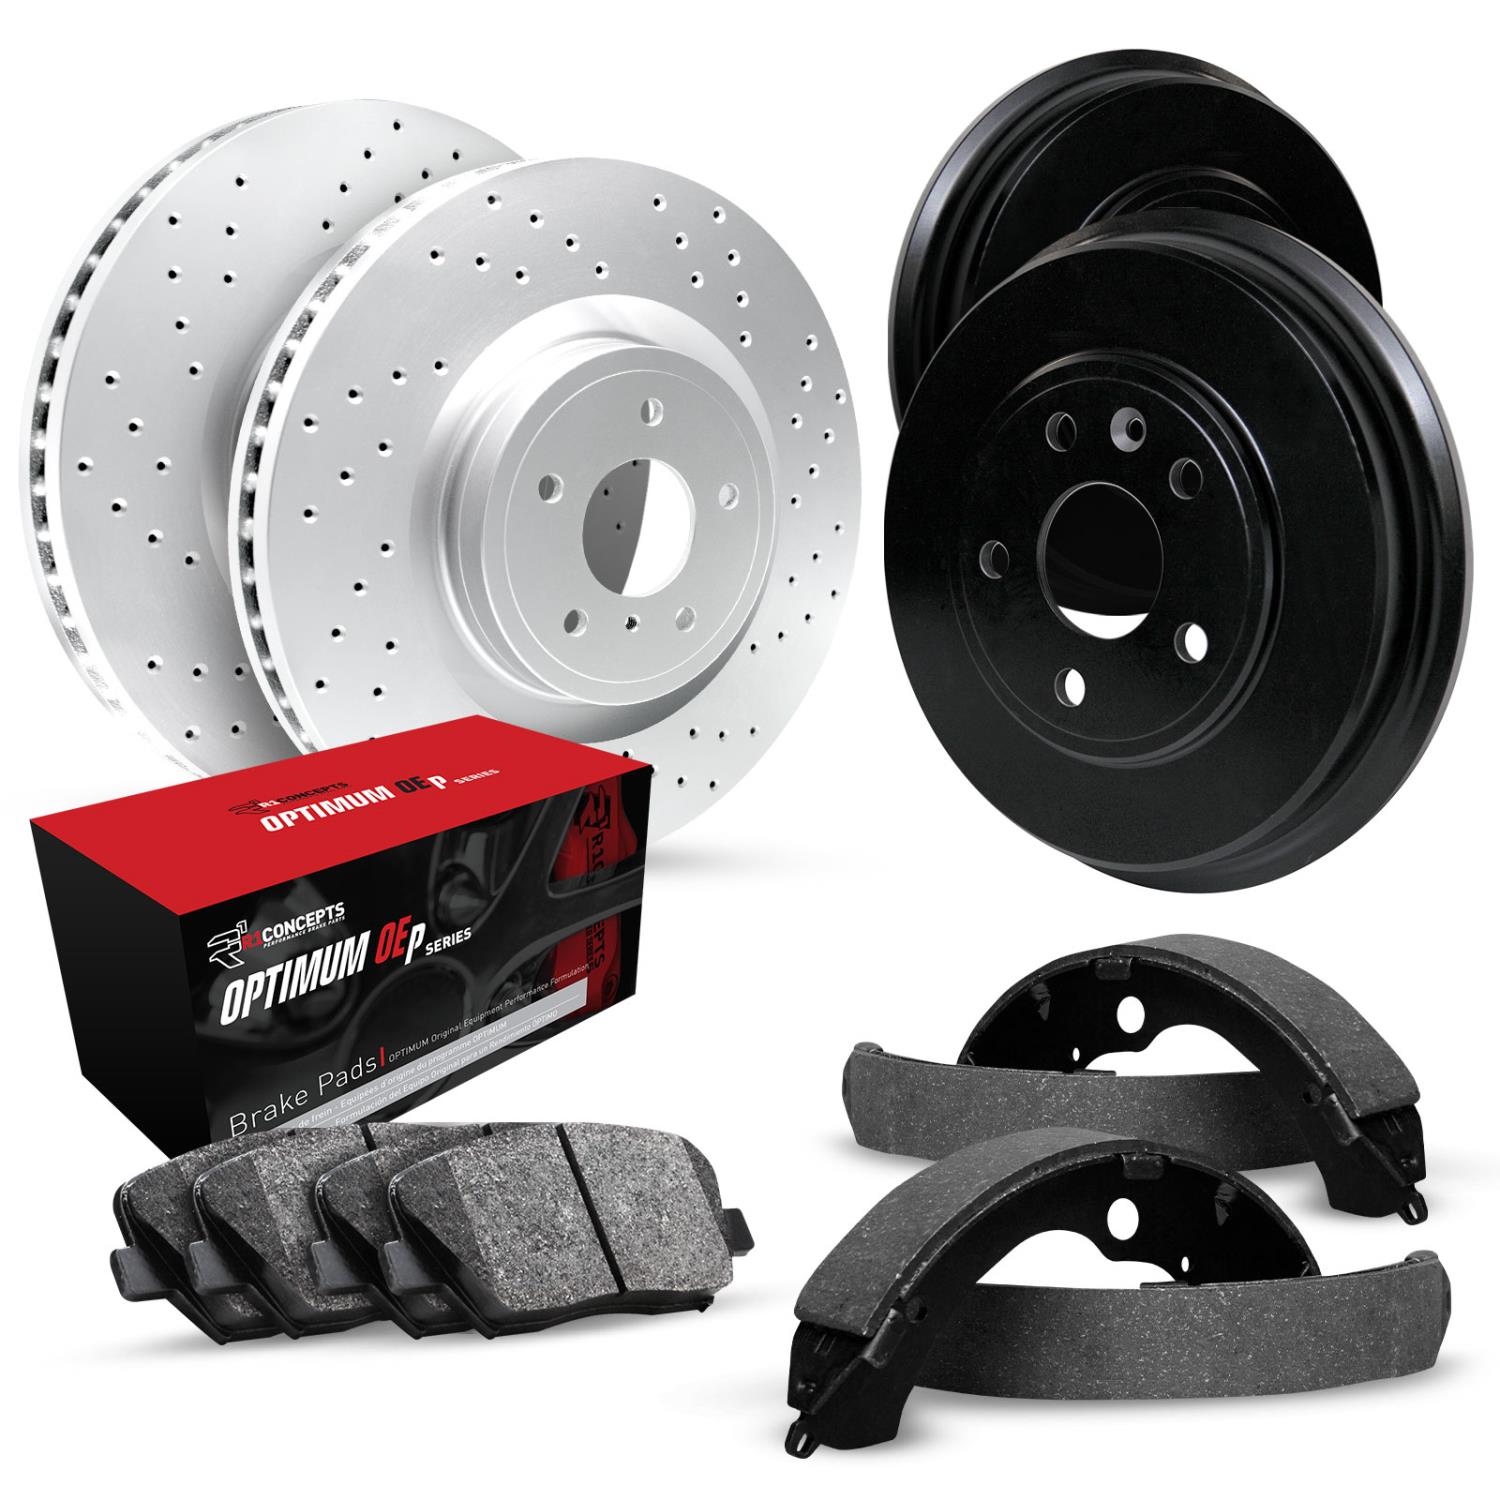 GEO-Carbon Drilled Brake Rotor & Drum Set w/Optimum OE Pads & Shoes, 1990-1997 Acura/Honda, Position: Front & Rear